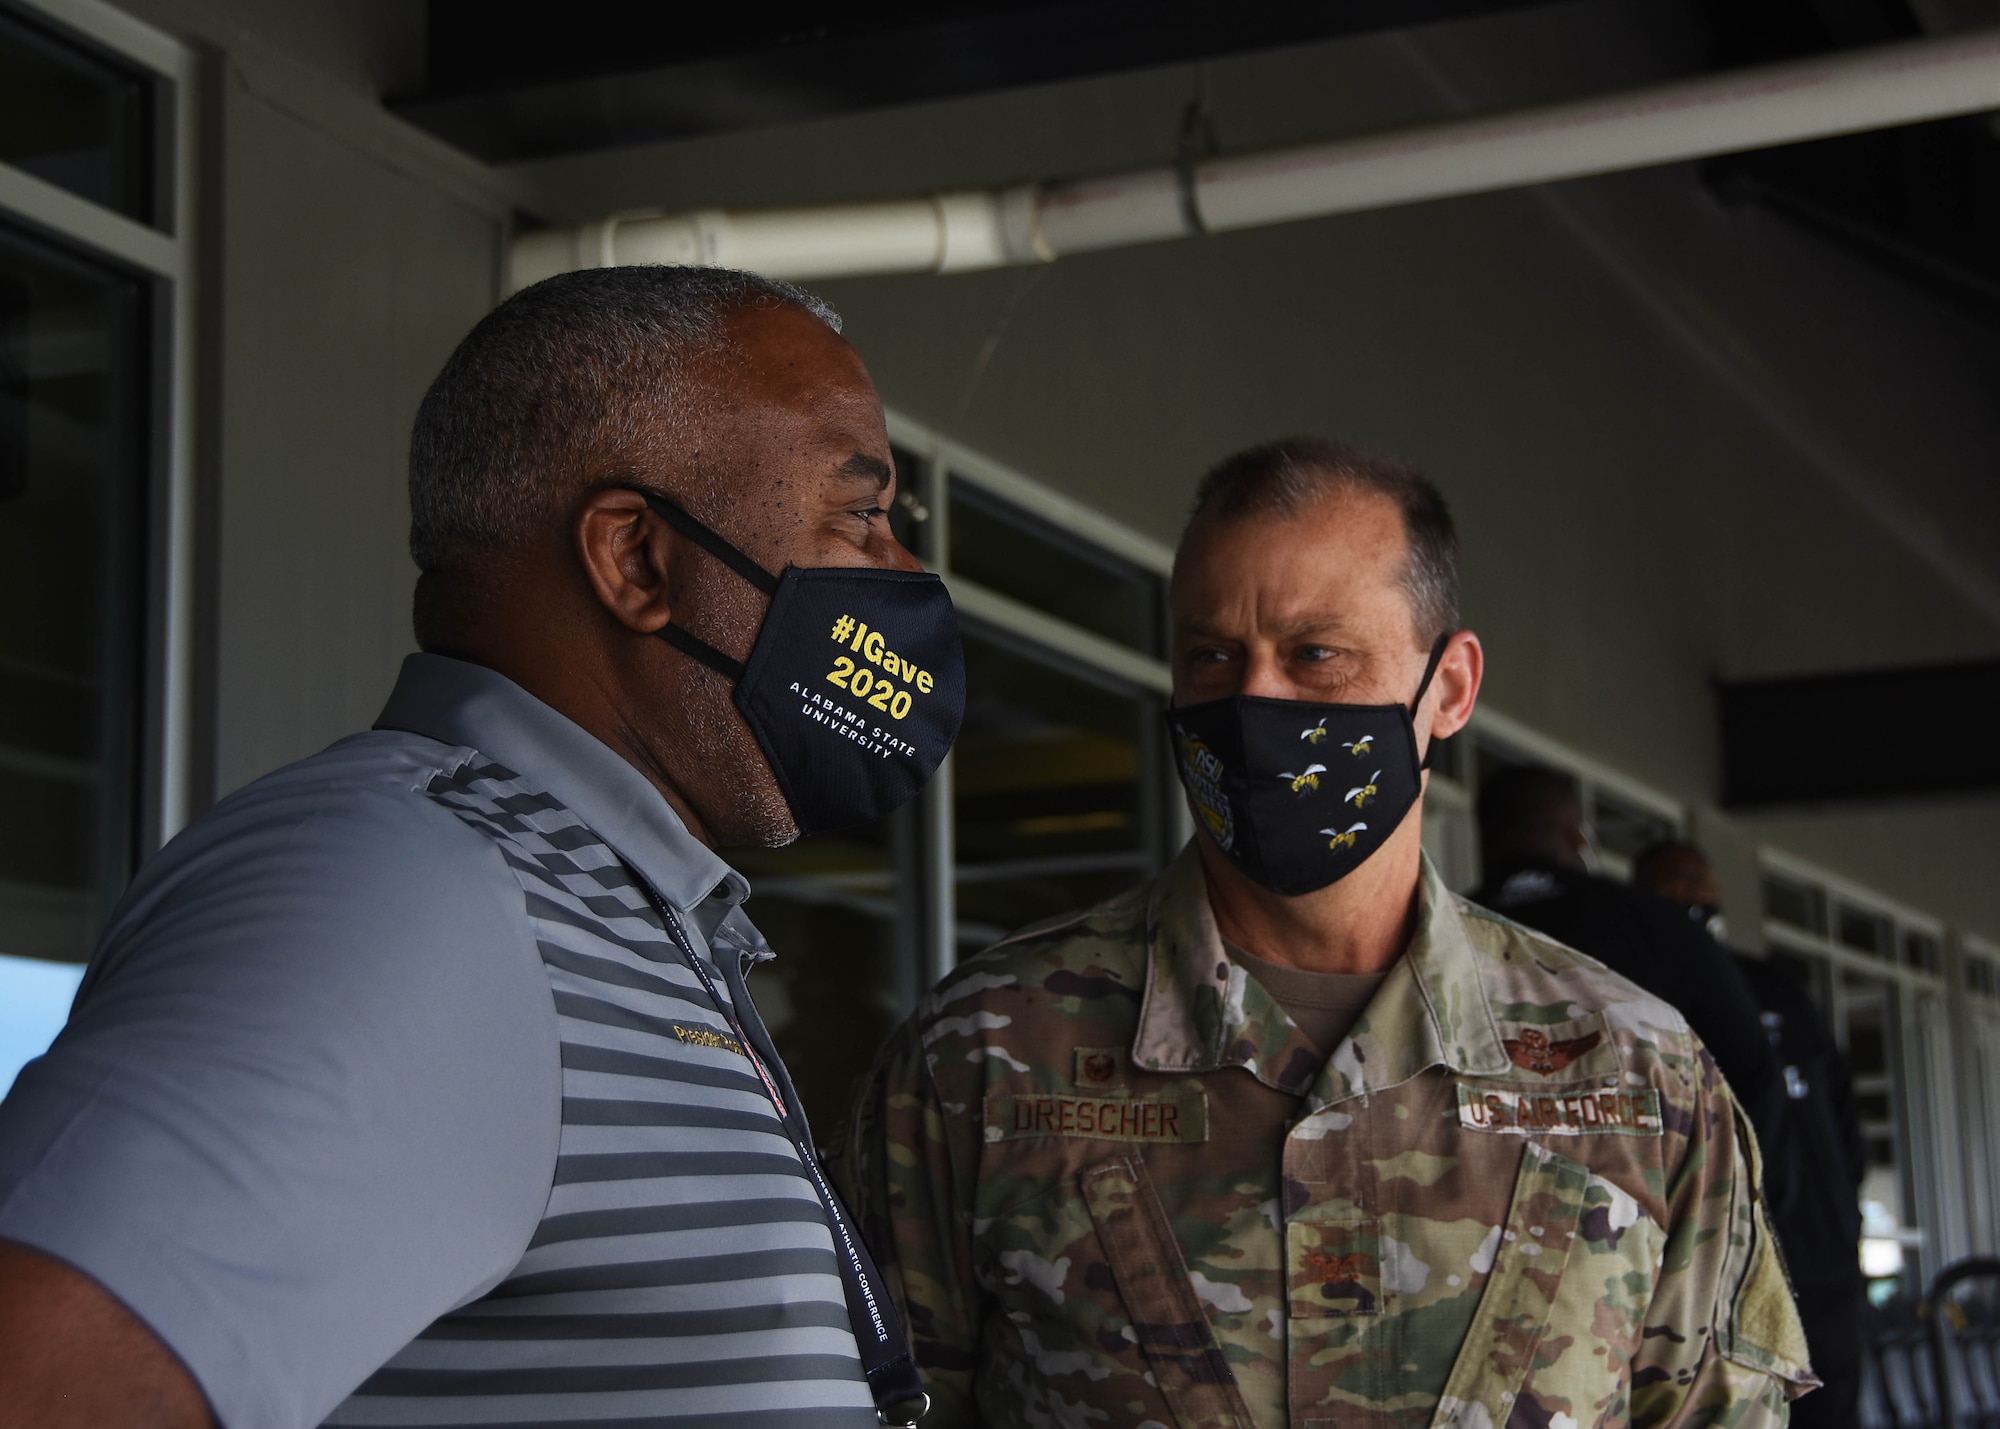 Alabama State University president, Dr. Quinton Ross and 908th Airlift Wing commander, Col. Craig Drescher discuss the ongoing partnership between the university and the wing before the 908th conducted a flyover prior to the start of an ASU home football game April 10 at ASU stadium in Montgomery, Alabama.